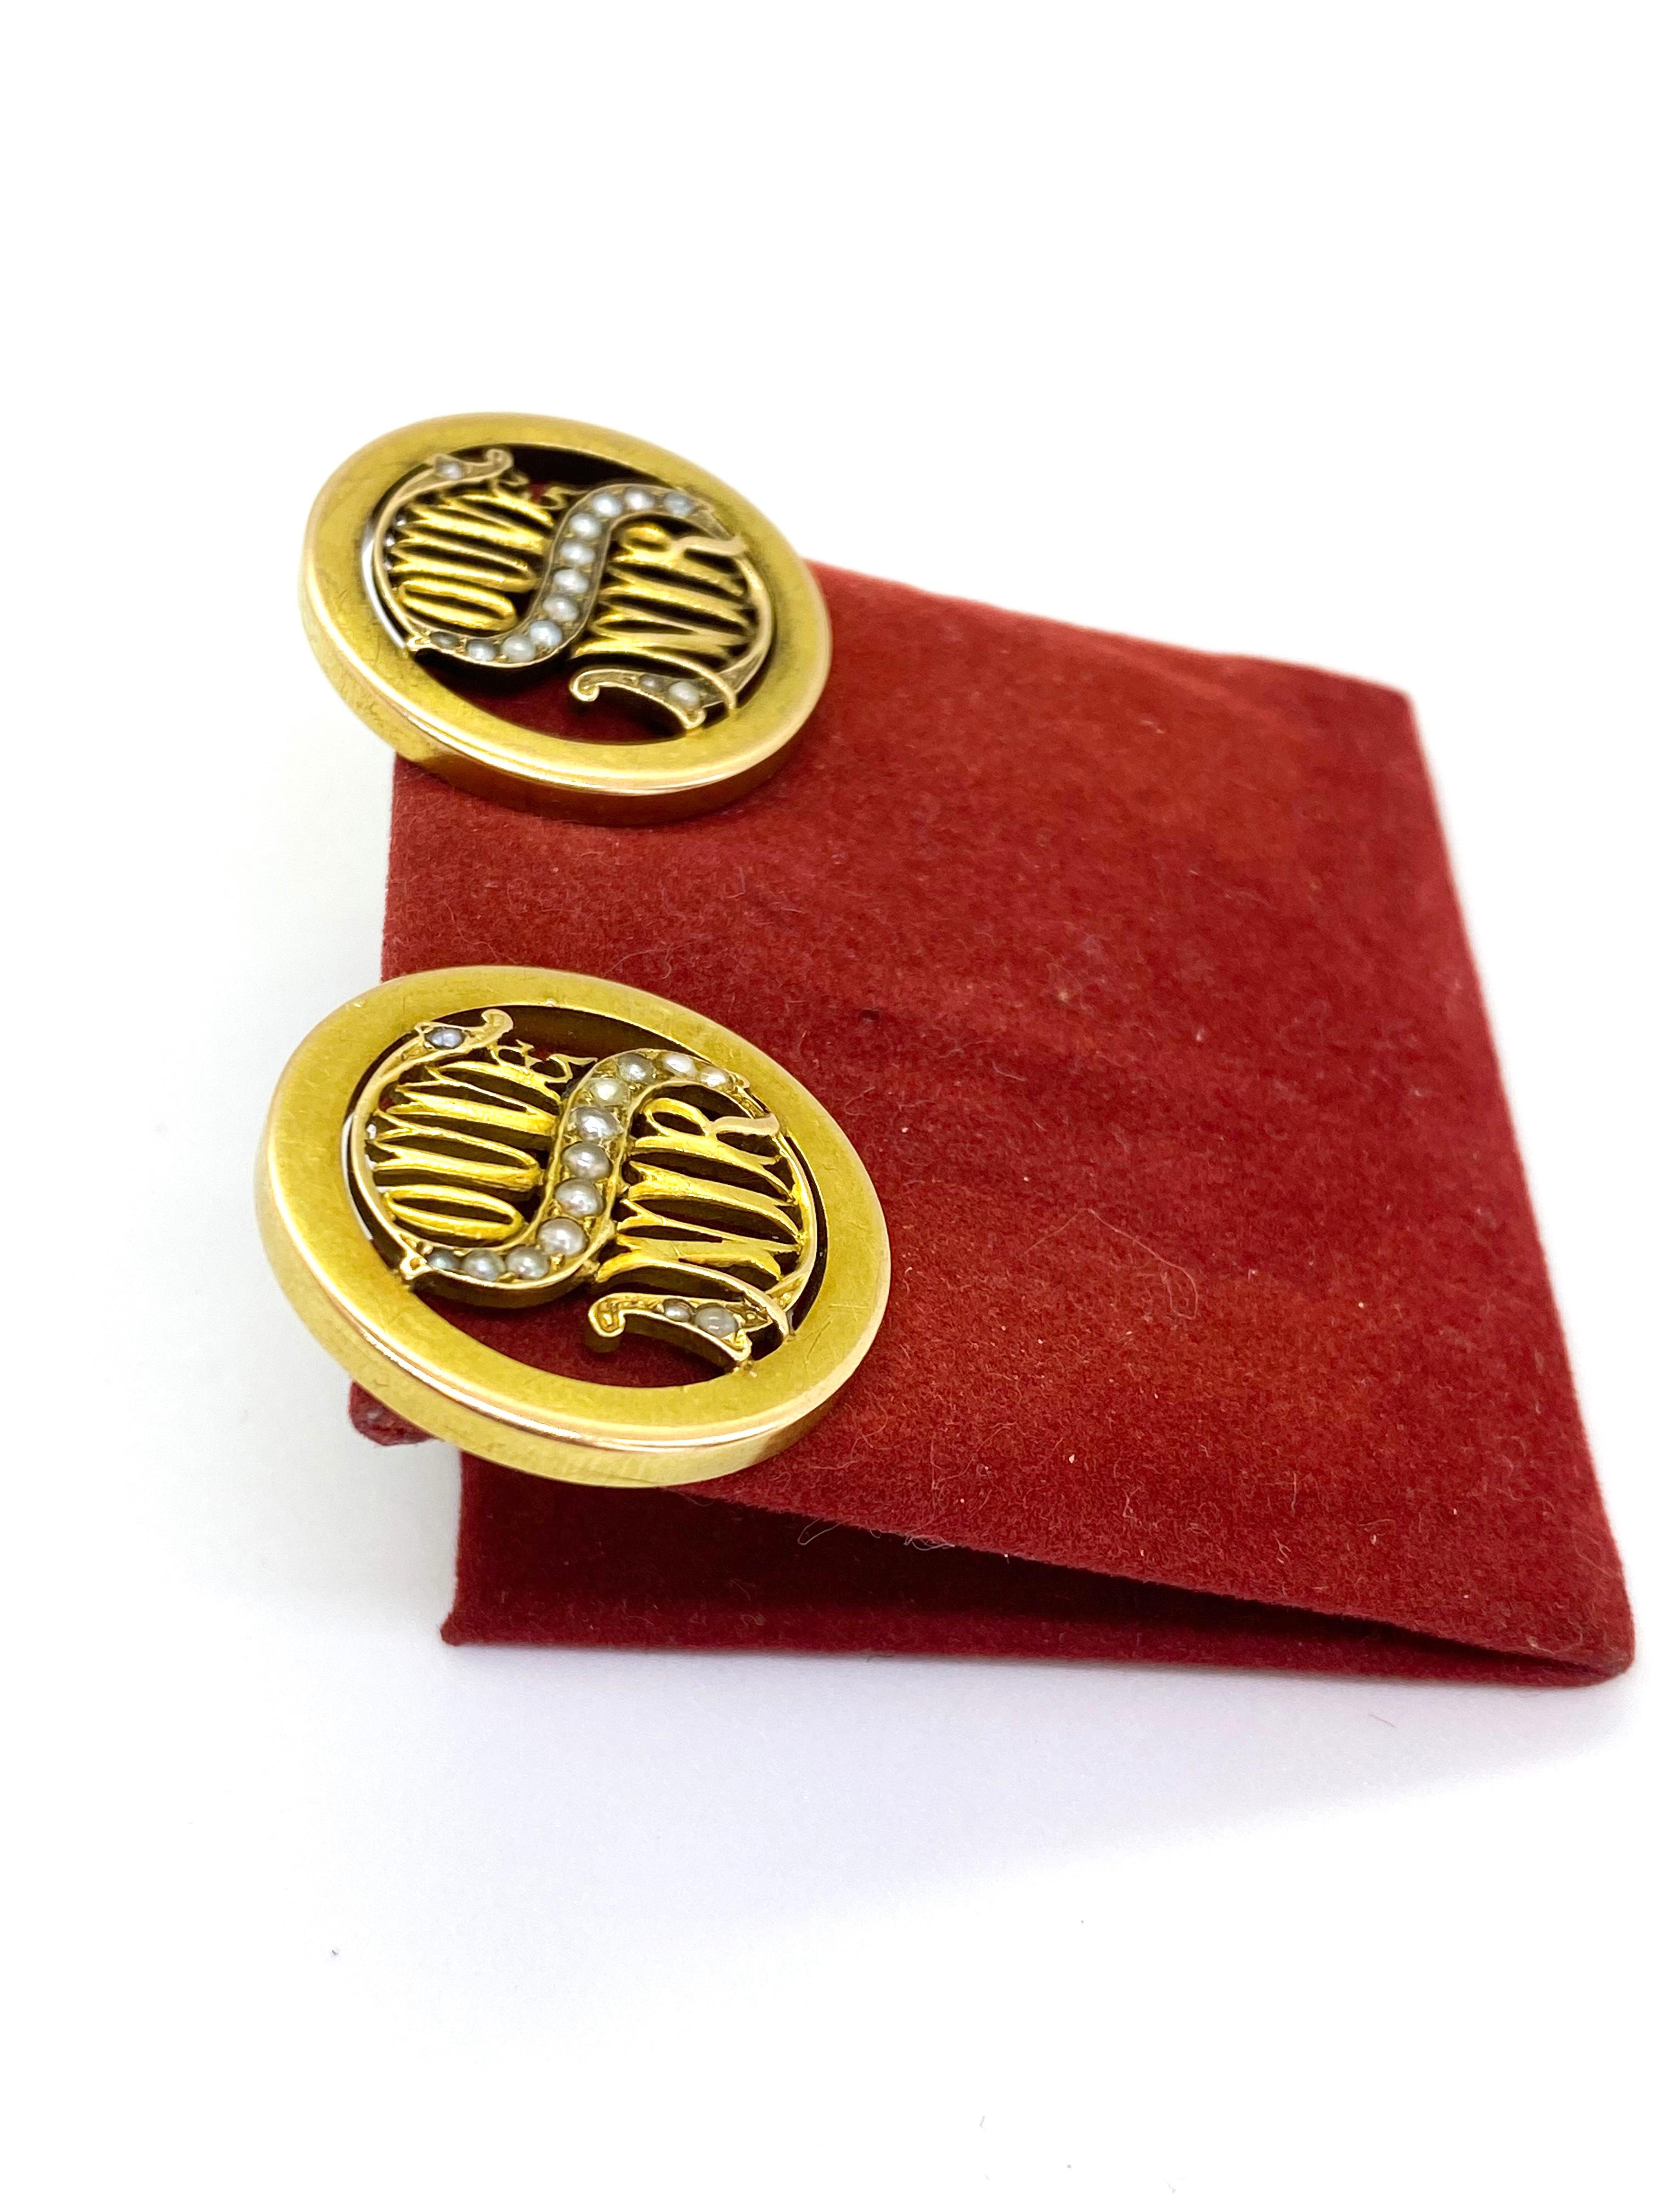 Russian Empire 14 Carat Yellow Gold Pearls Russia Souvenir Cufflinks For Sale